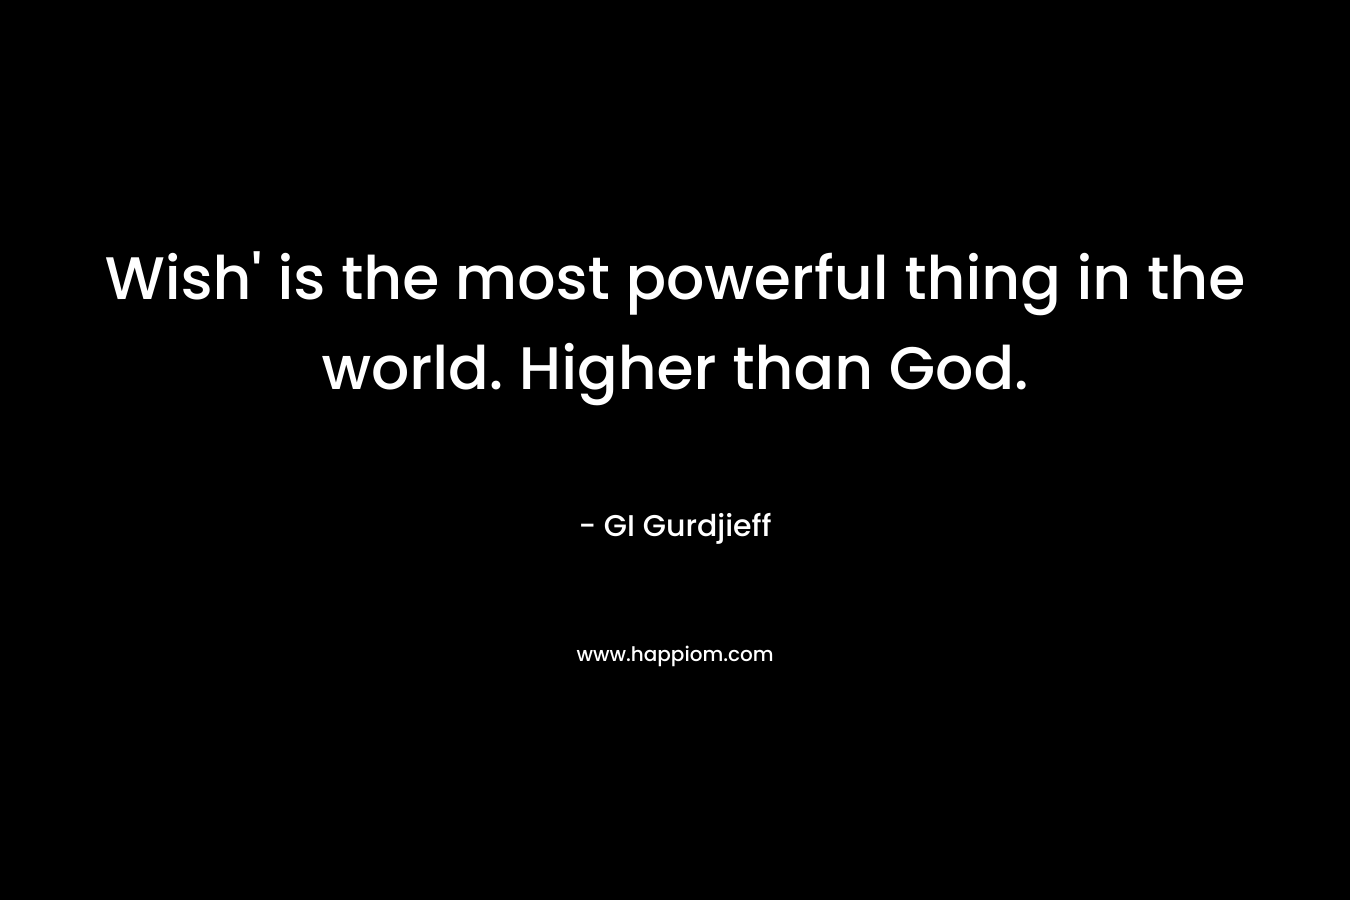 Wish’ is the most powerful thing in the world. Higher than God. – GI Gurdjieff